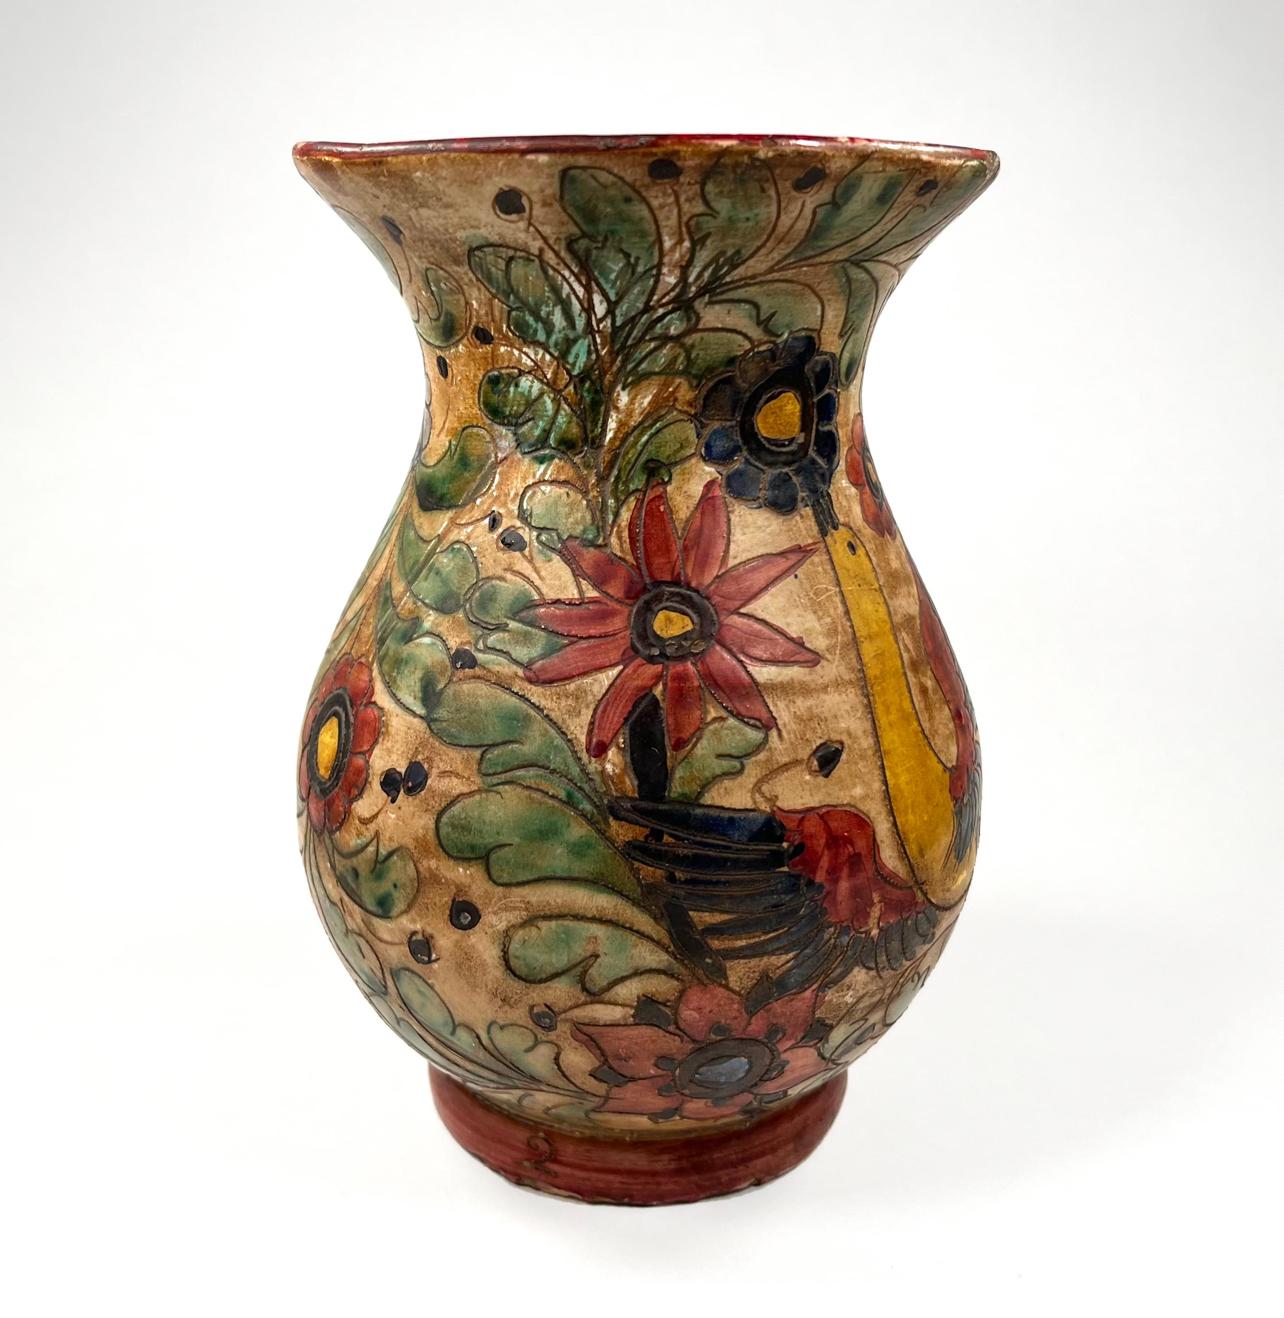 An Italian Majolica Hand Painted Majolica Pottery vase from the late 19th Century. 

The vase is a stunning example of hand crafted Italian Pottery.   Close attention to Birds, foliate and flowers with a 3-Dimensional quality make this piece a show